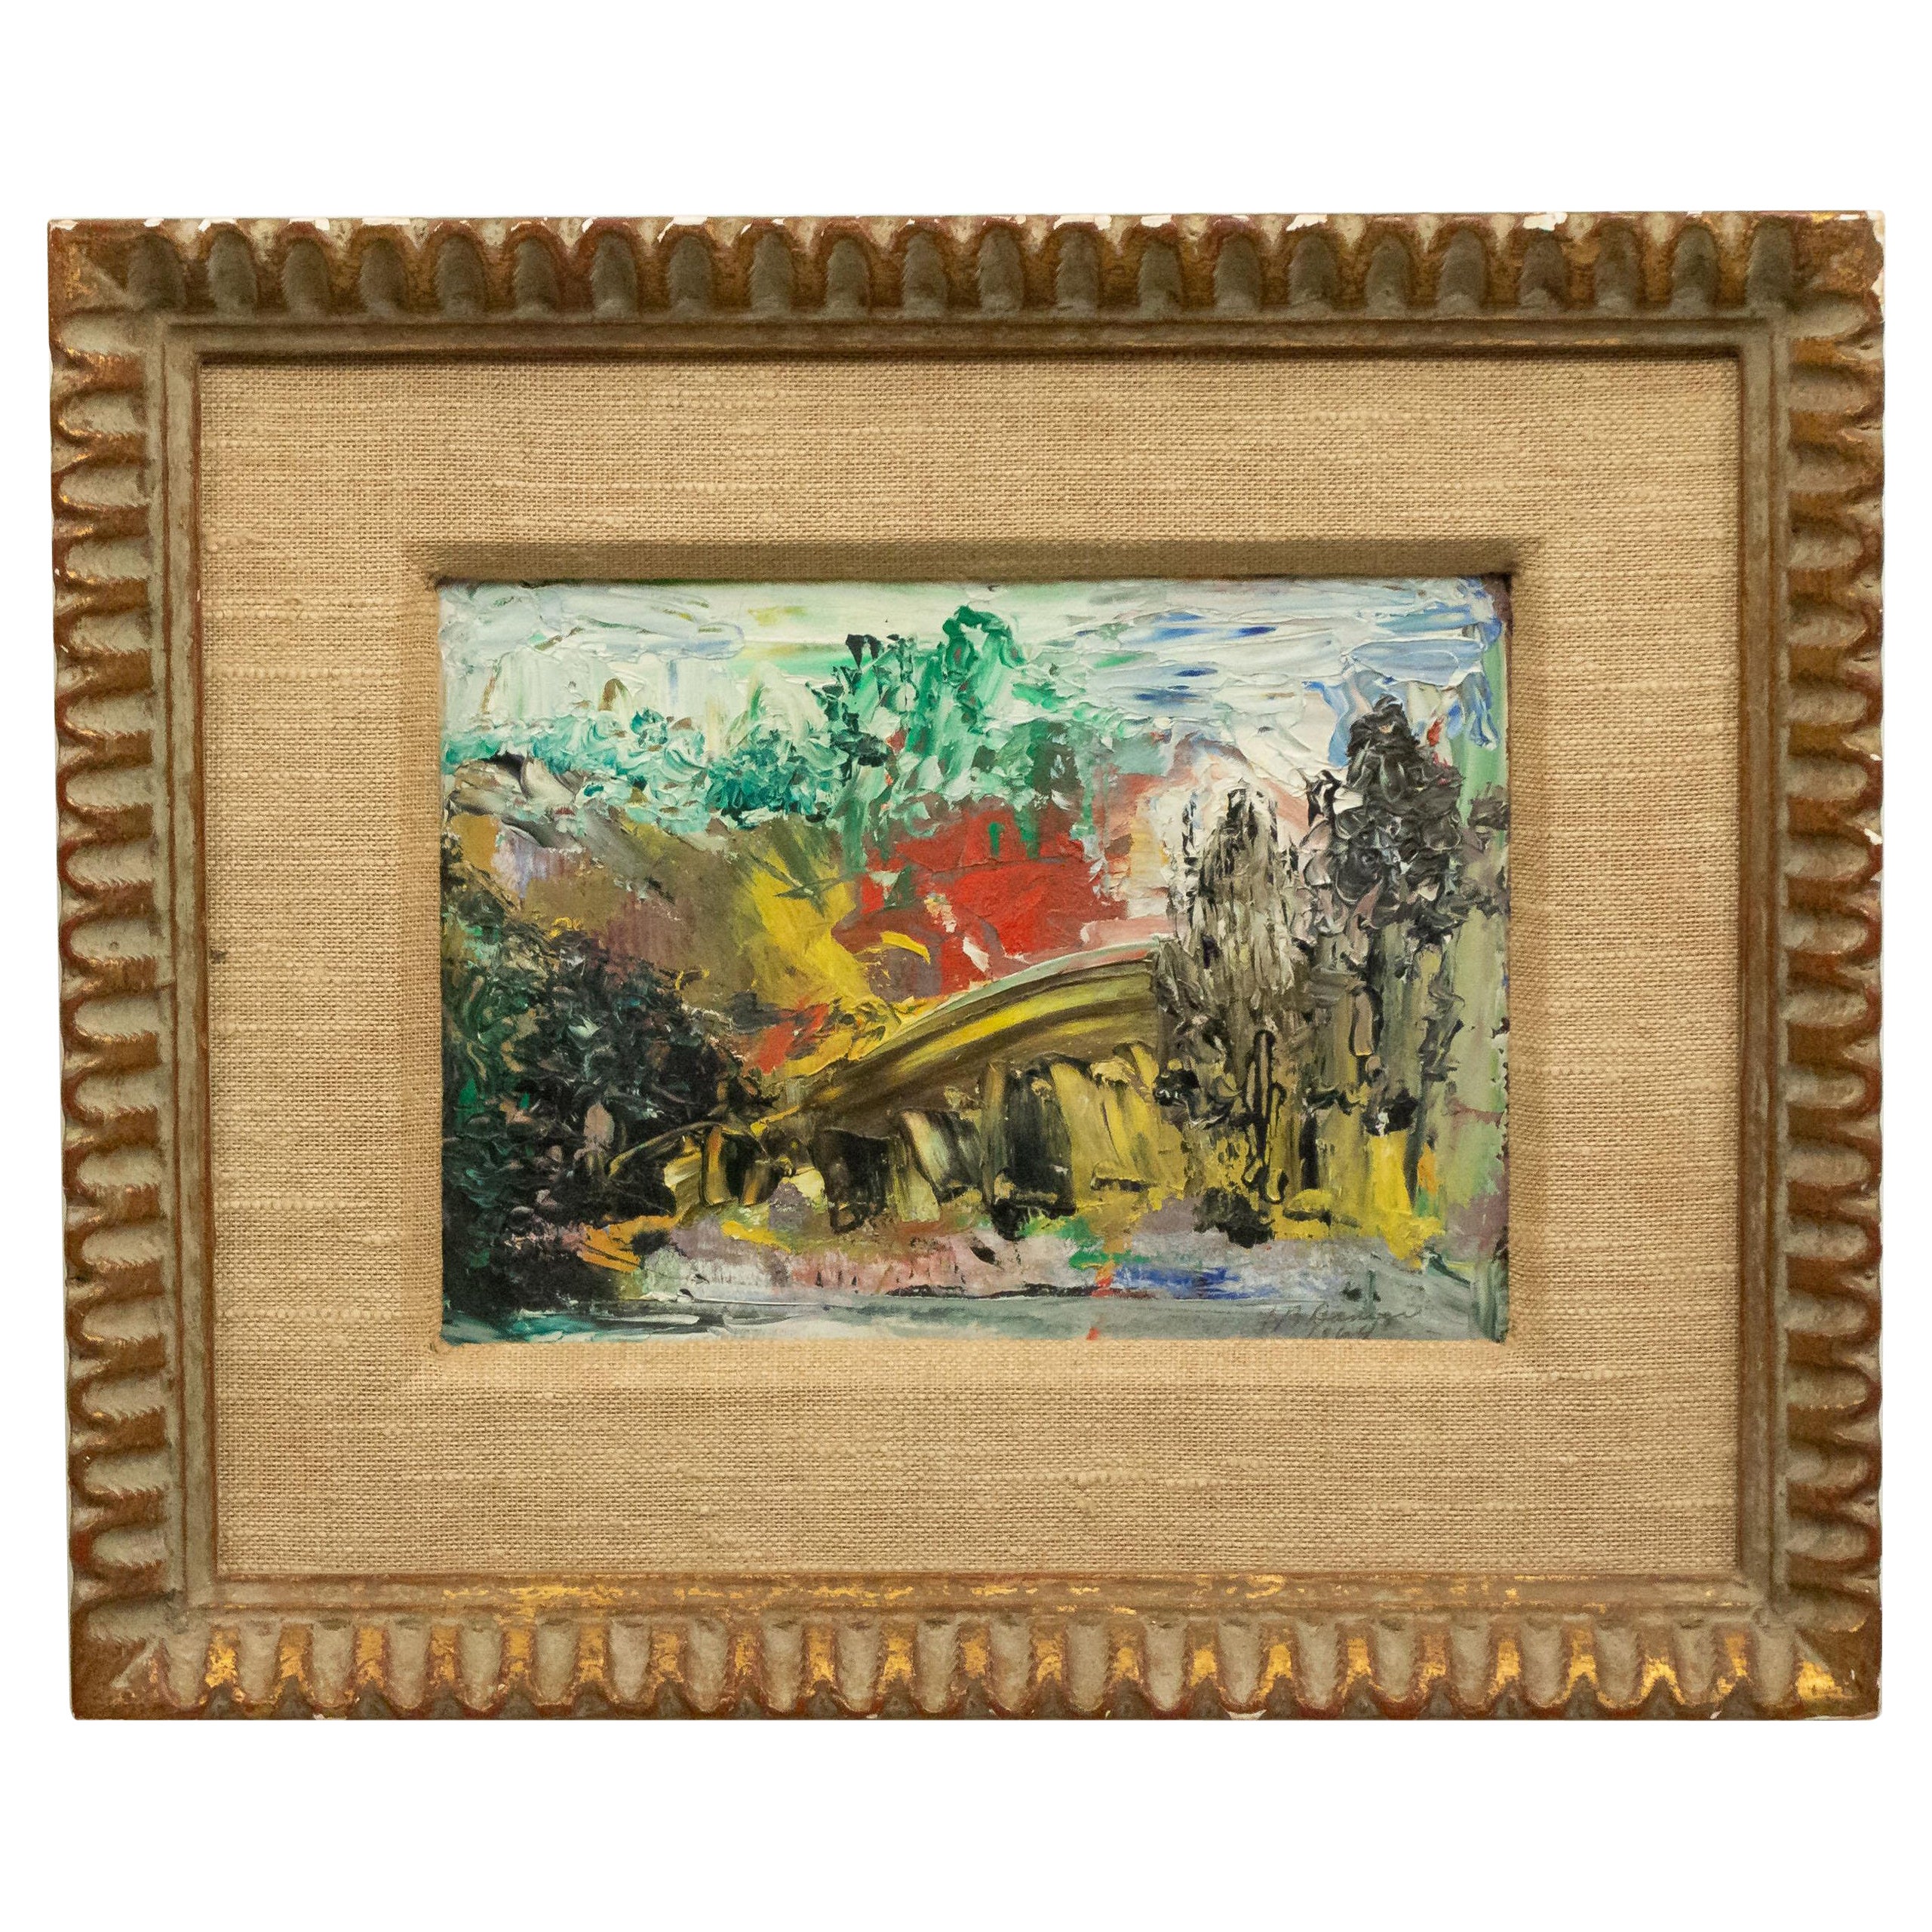 Oil Painting of a Landscape in a Venetian Style Frame